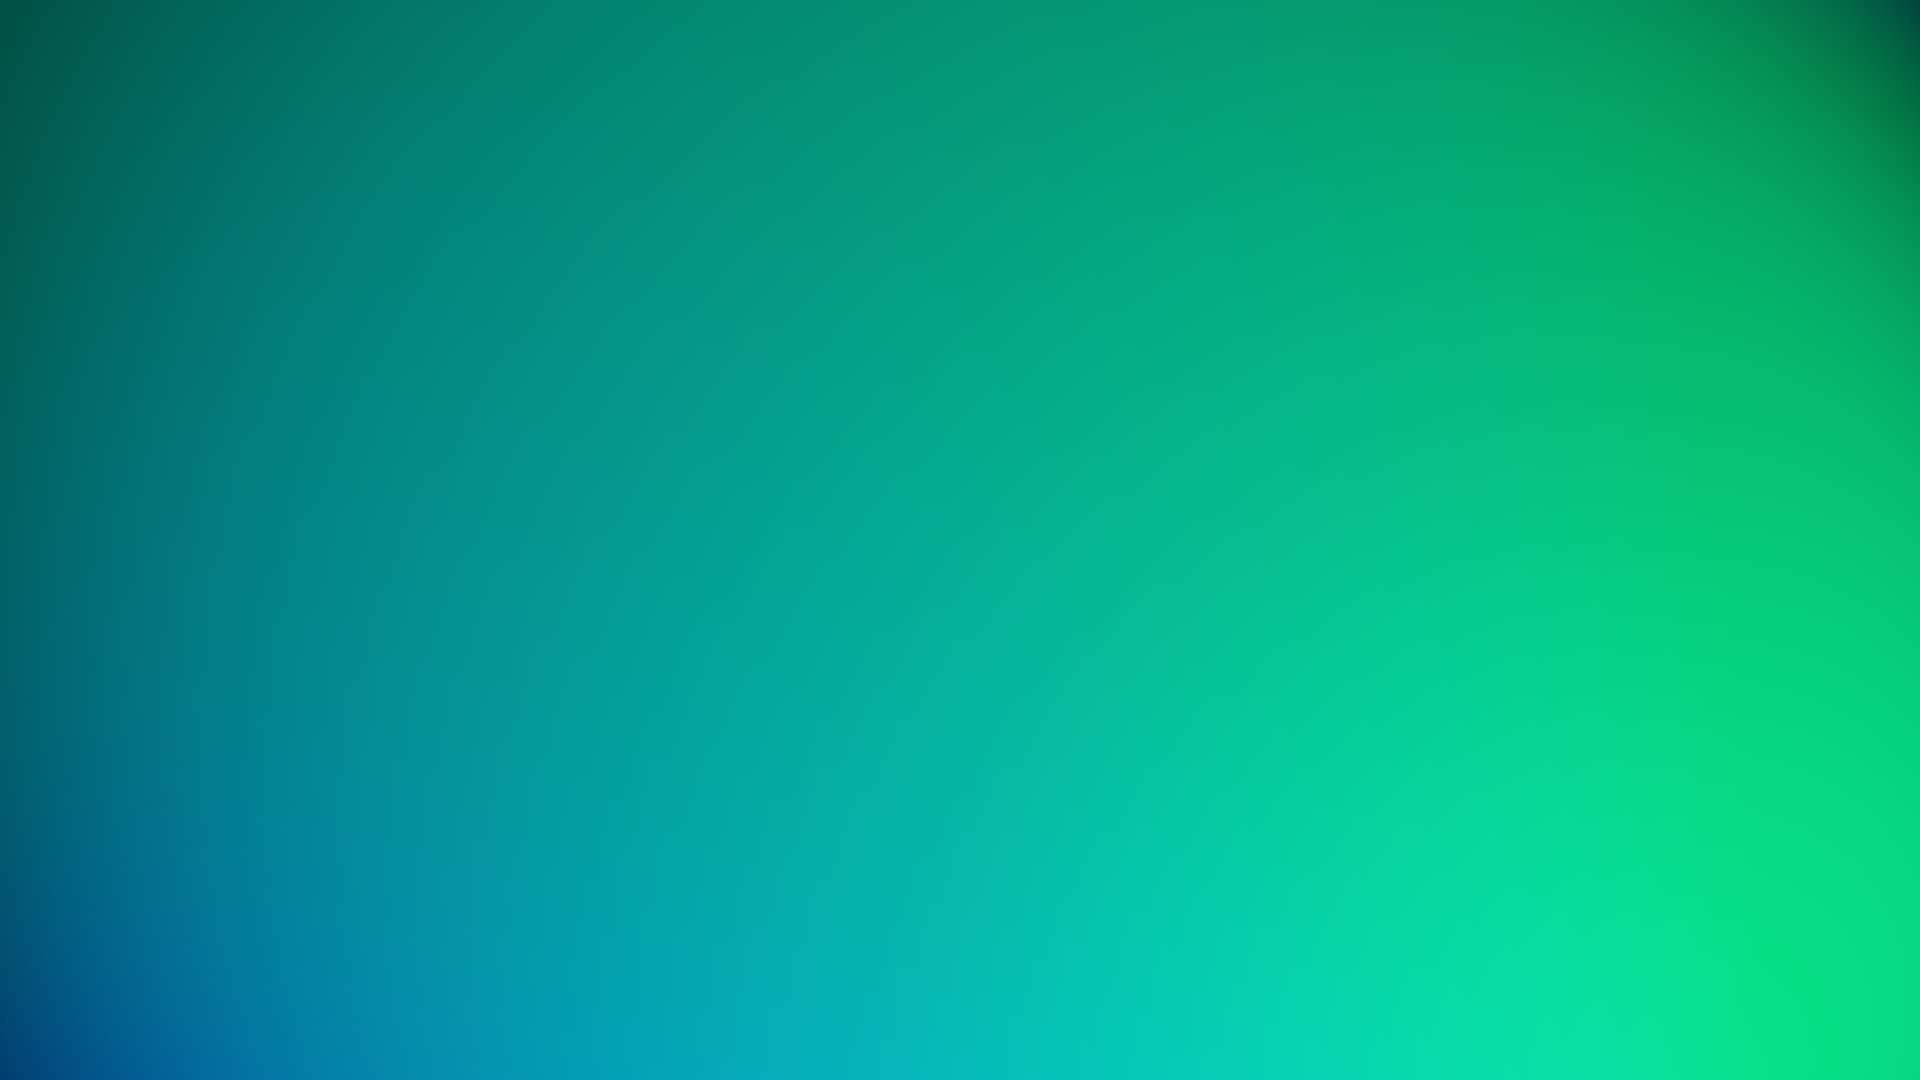 High Resolution Wallpaper | Turquoise 1920x1080 px